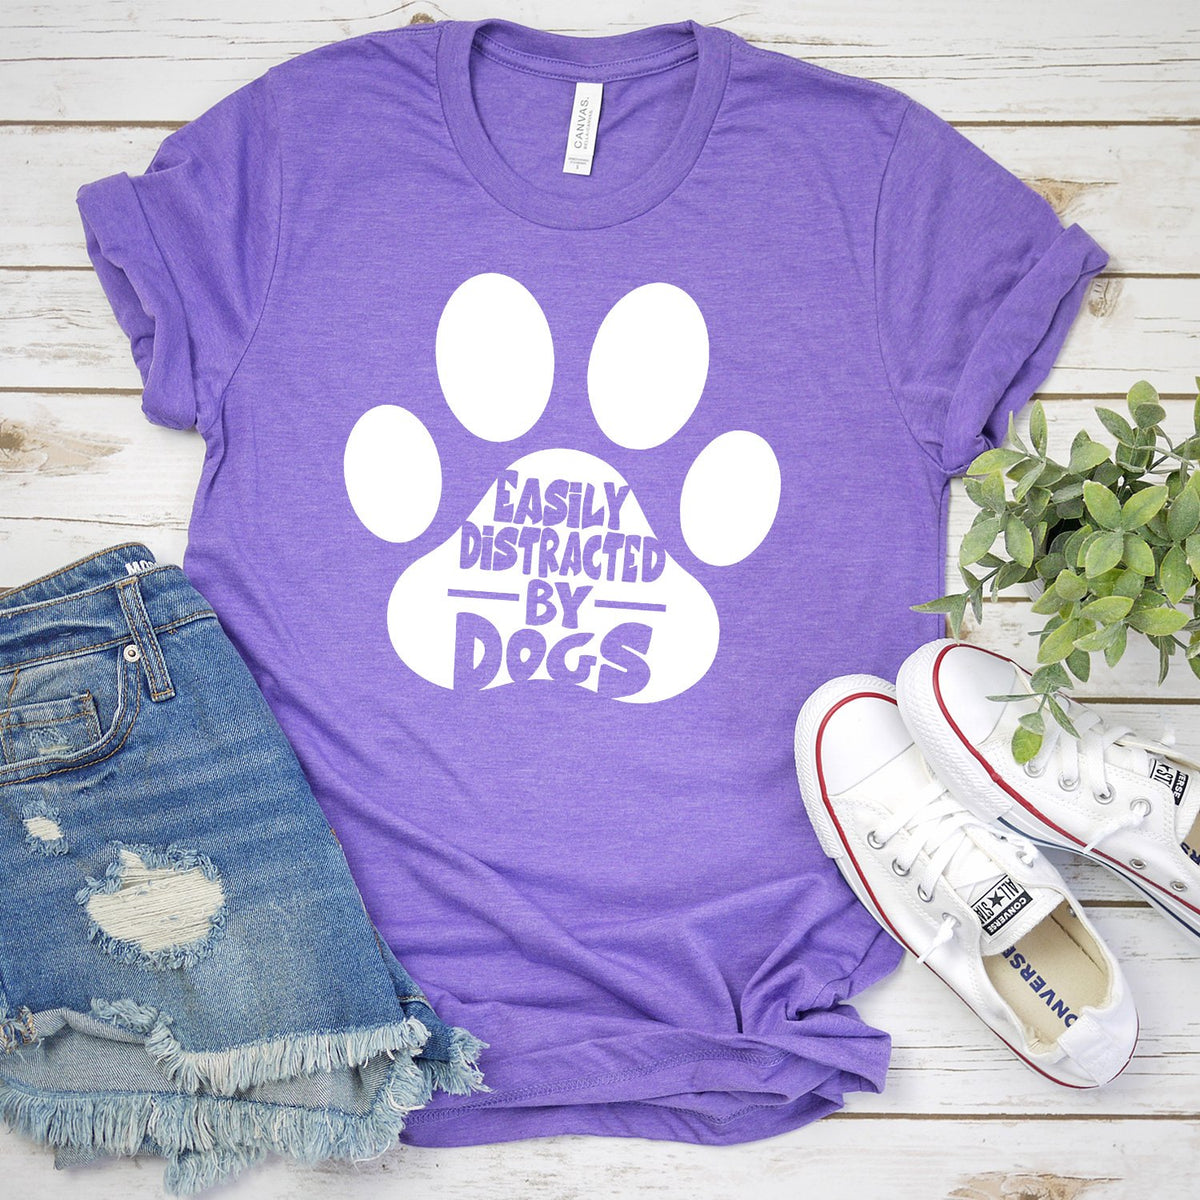 Easily Distracted By Dogs - Short Sleeve Tee Shirt